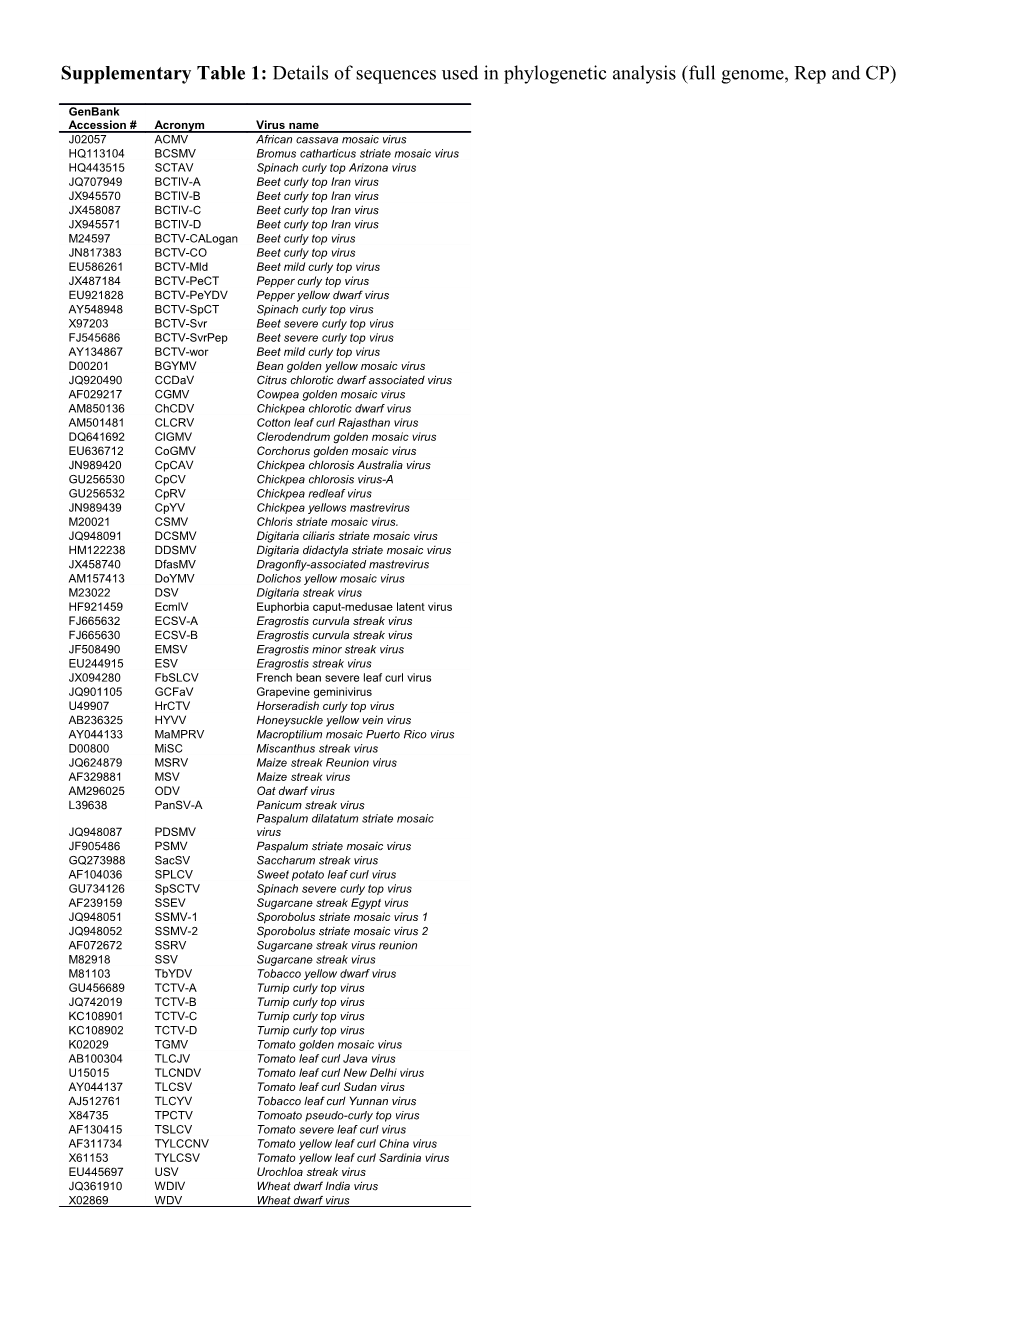 Supplementary Table 1: Details of Sequences Used in Phylogenetic Analysis (Full Genome